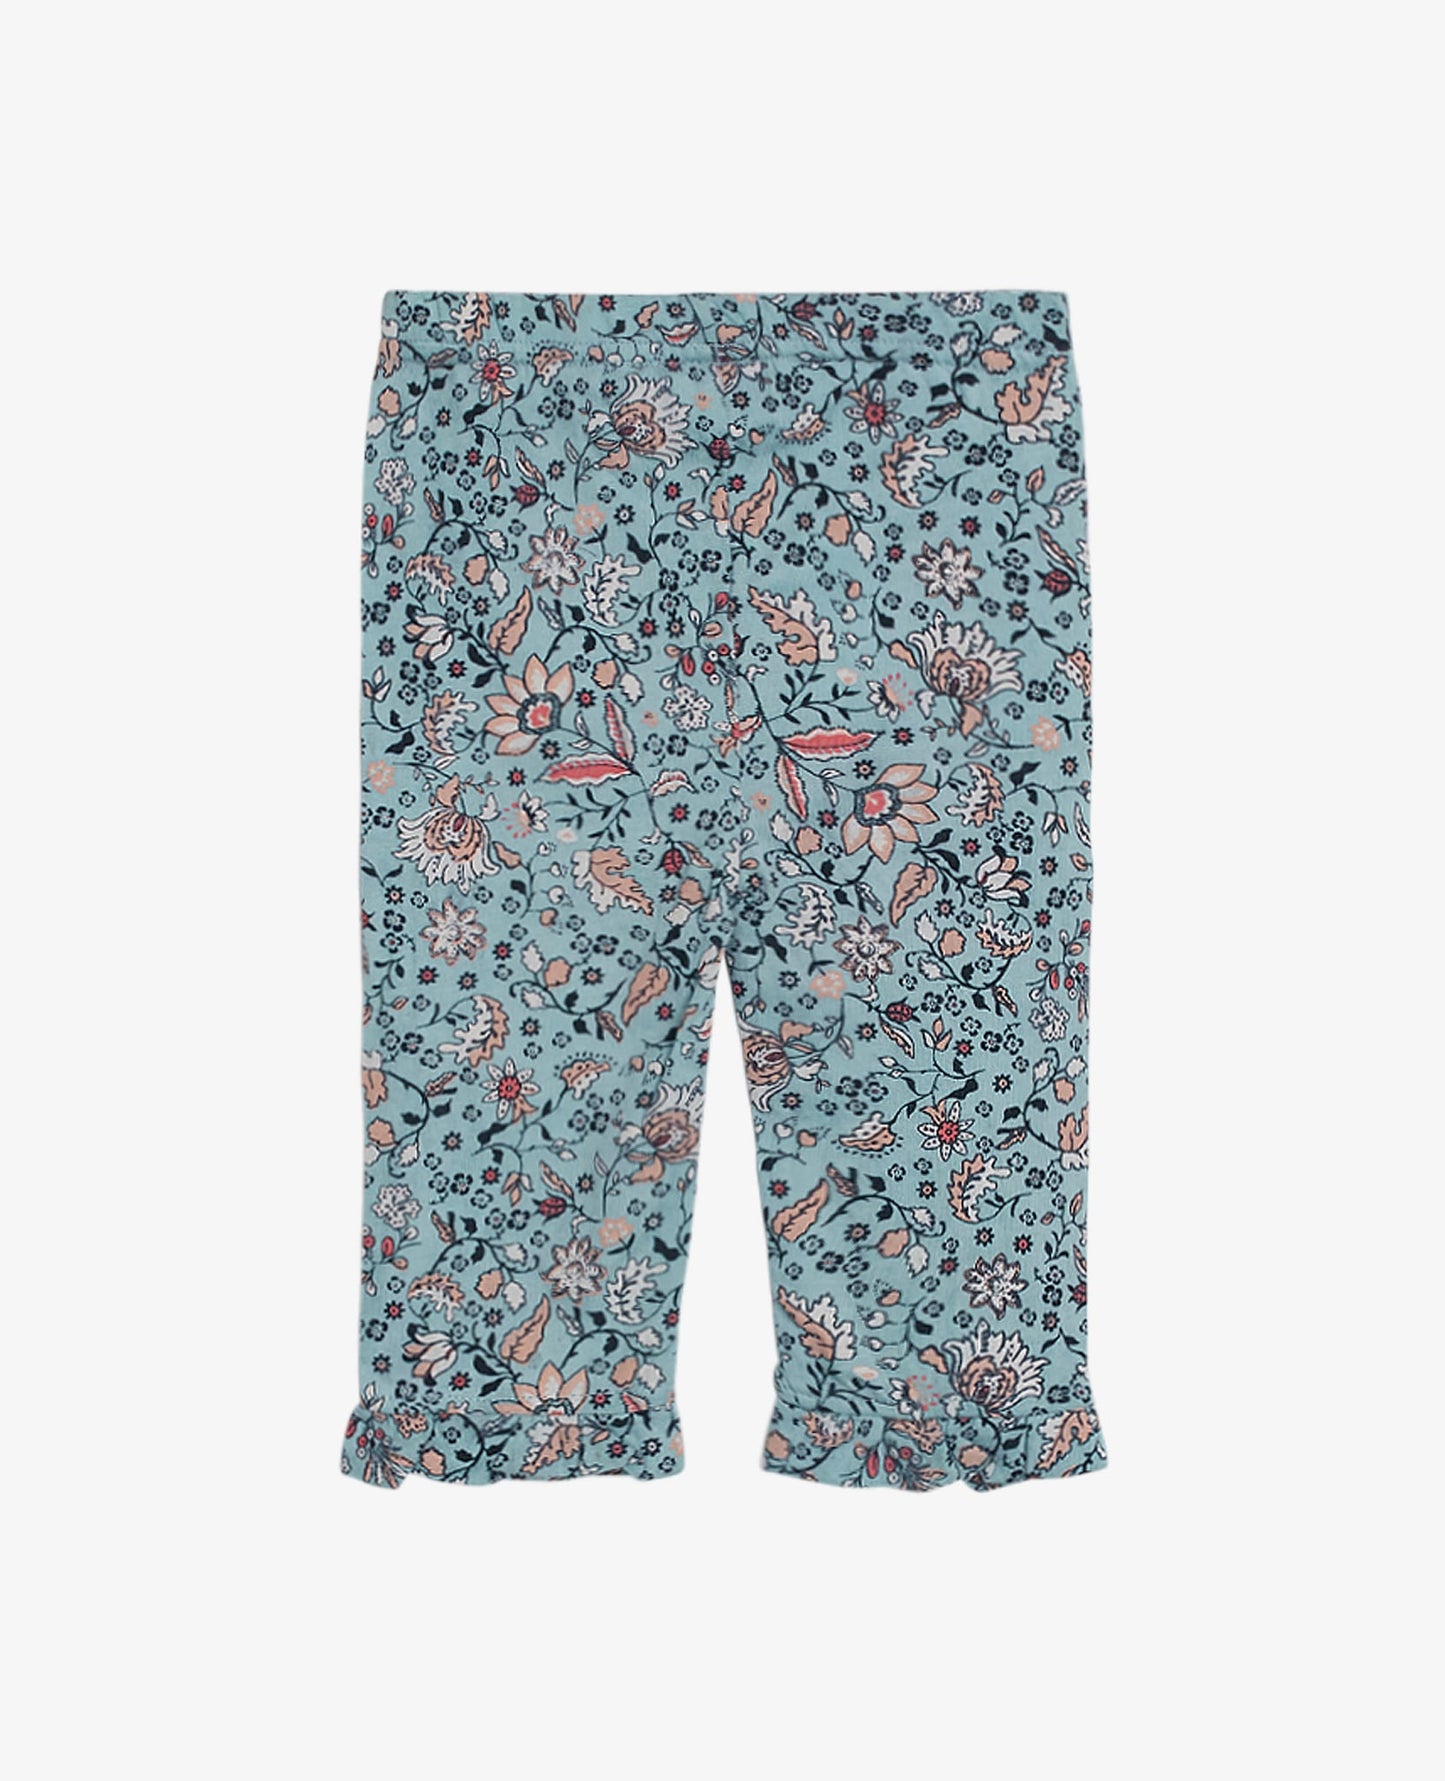 BABY NEW FLORAL JERSEY LEGGINGS